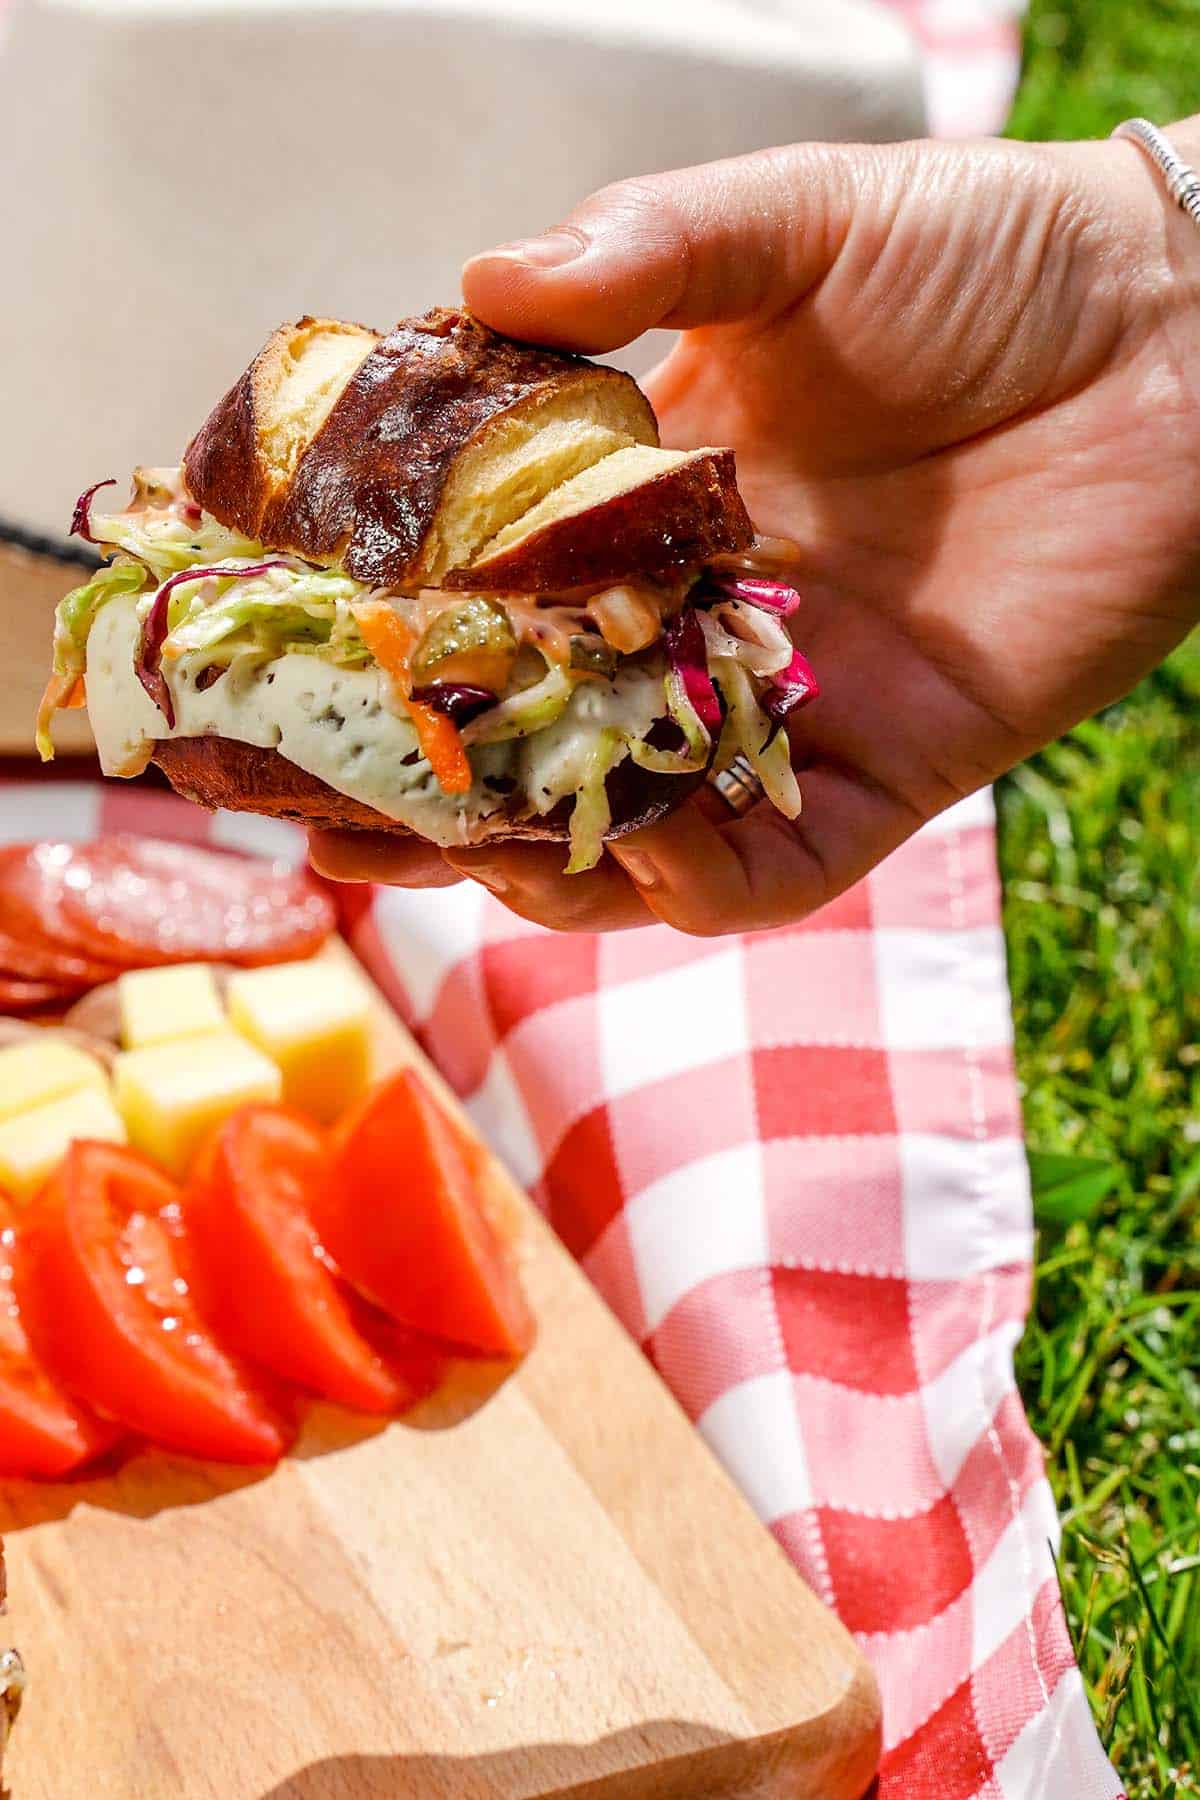 Coleslaw Swiss cheese melt, held at picnic outside.